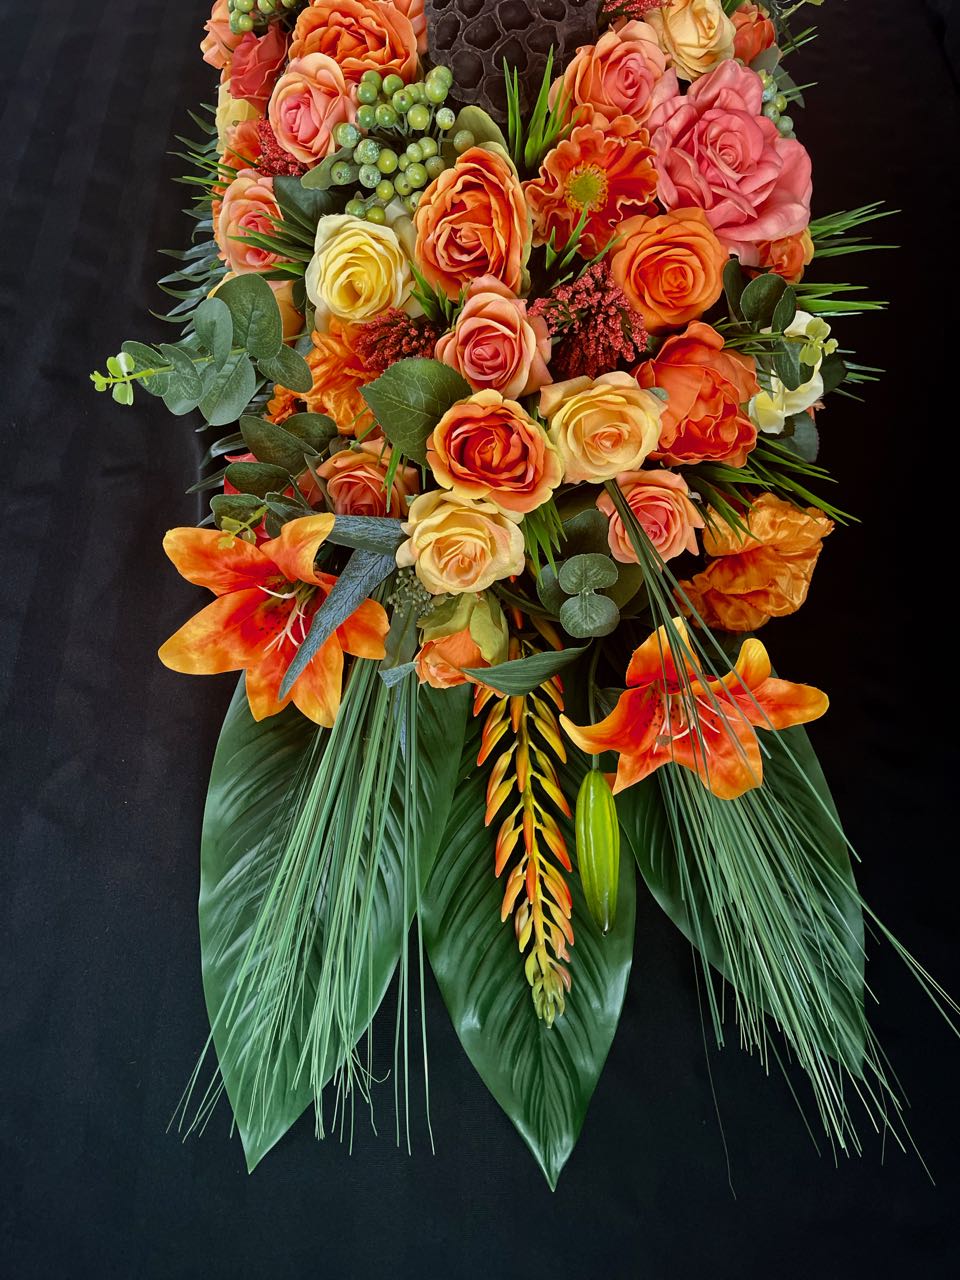 This vivid floral arrangement, a tribute to the fiery hues of a summer sunset, juxtaposes the lushness of palm leaves, eucalyptus sprigs, and tall grasses with the vividness of tiger lillies, green hypercium berries, and an array of roses in sundry shades of orange and brown-hued honeycombs. This arrangement is four feet long and 16 inches wide.